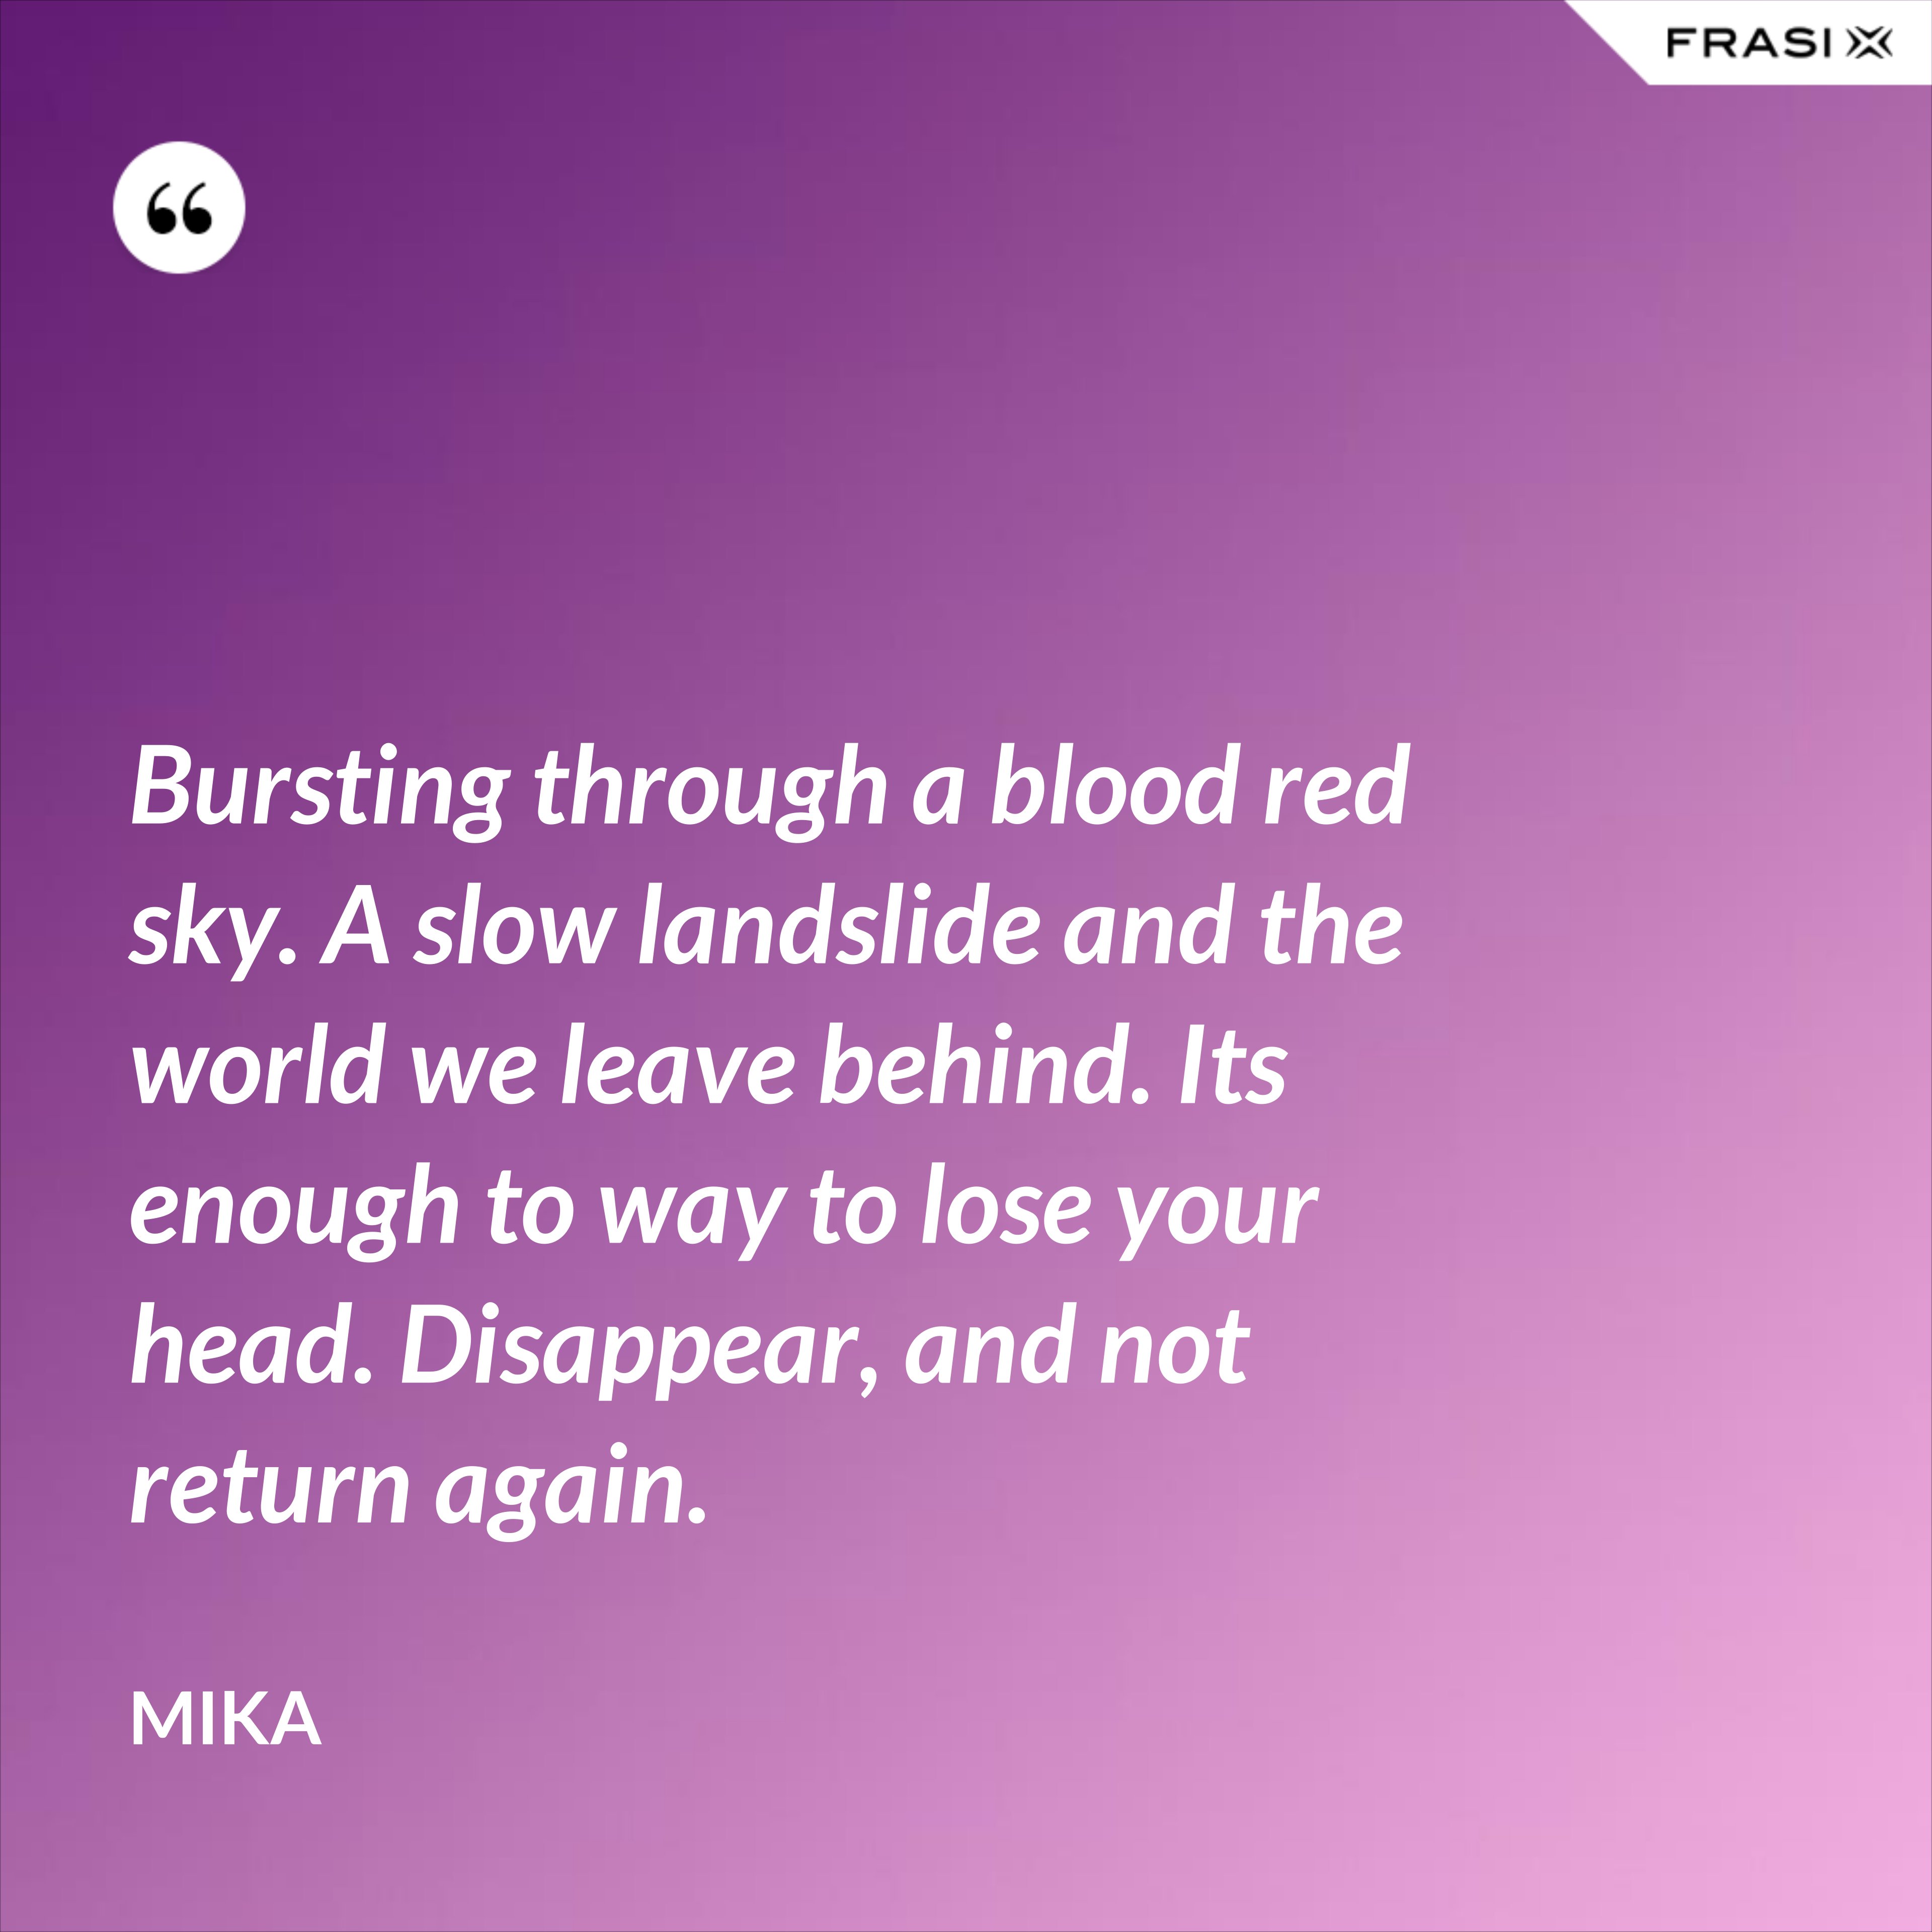 Bursting through a blood red sky. A slow landslide and the world we leave behind. Its enough to way to lose your head. Disappear, and not return again. - Mika